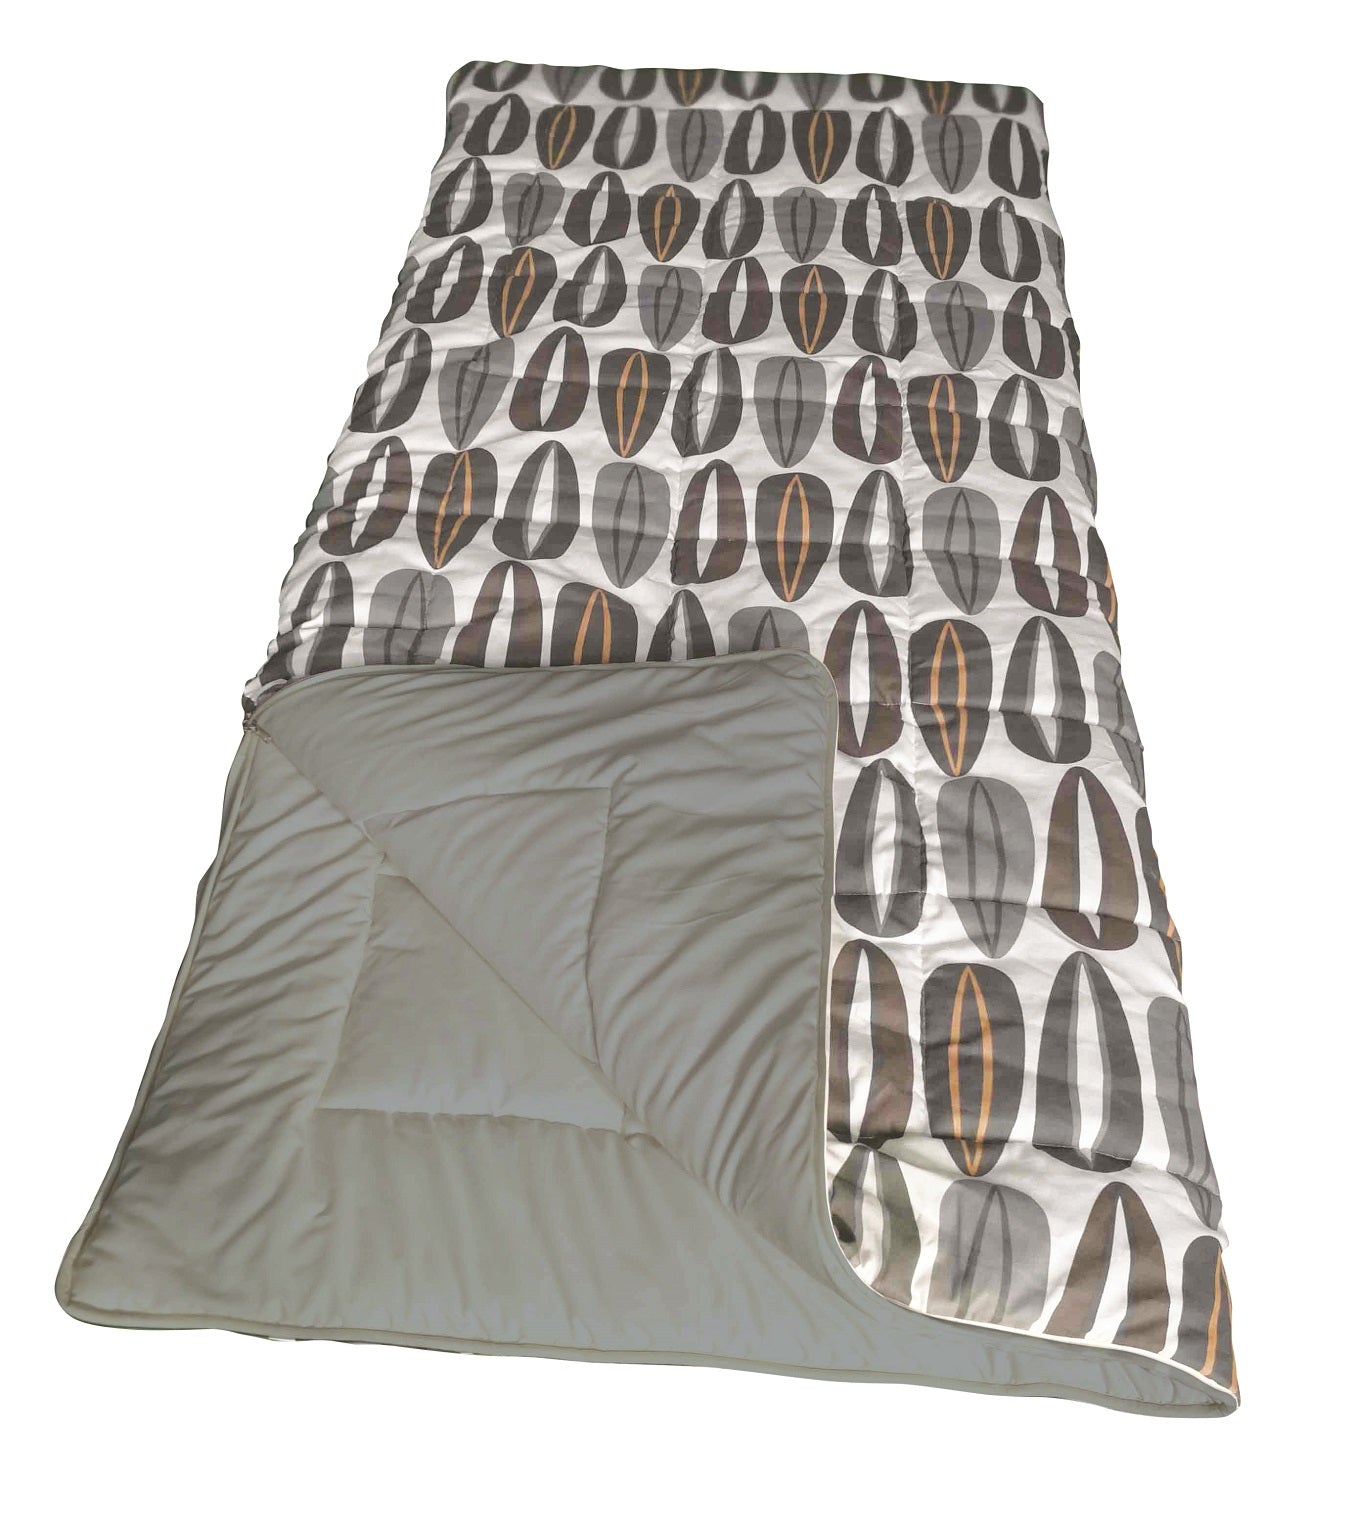 Mull - Super Deluxe King Size Sleeping Bag